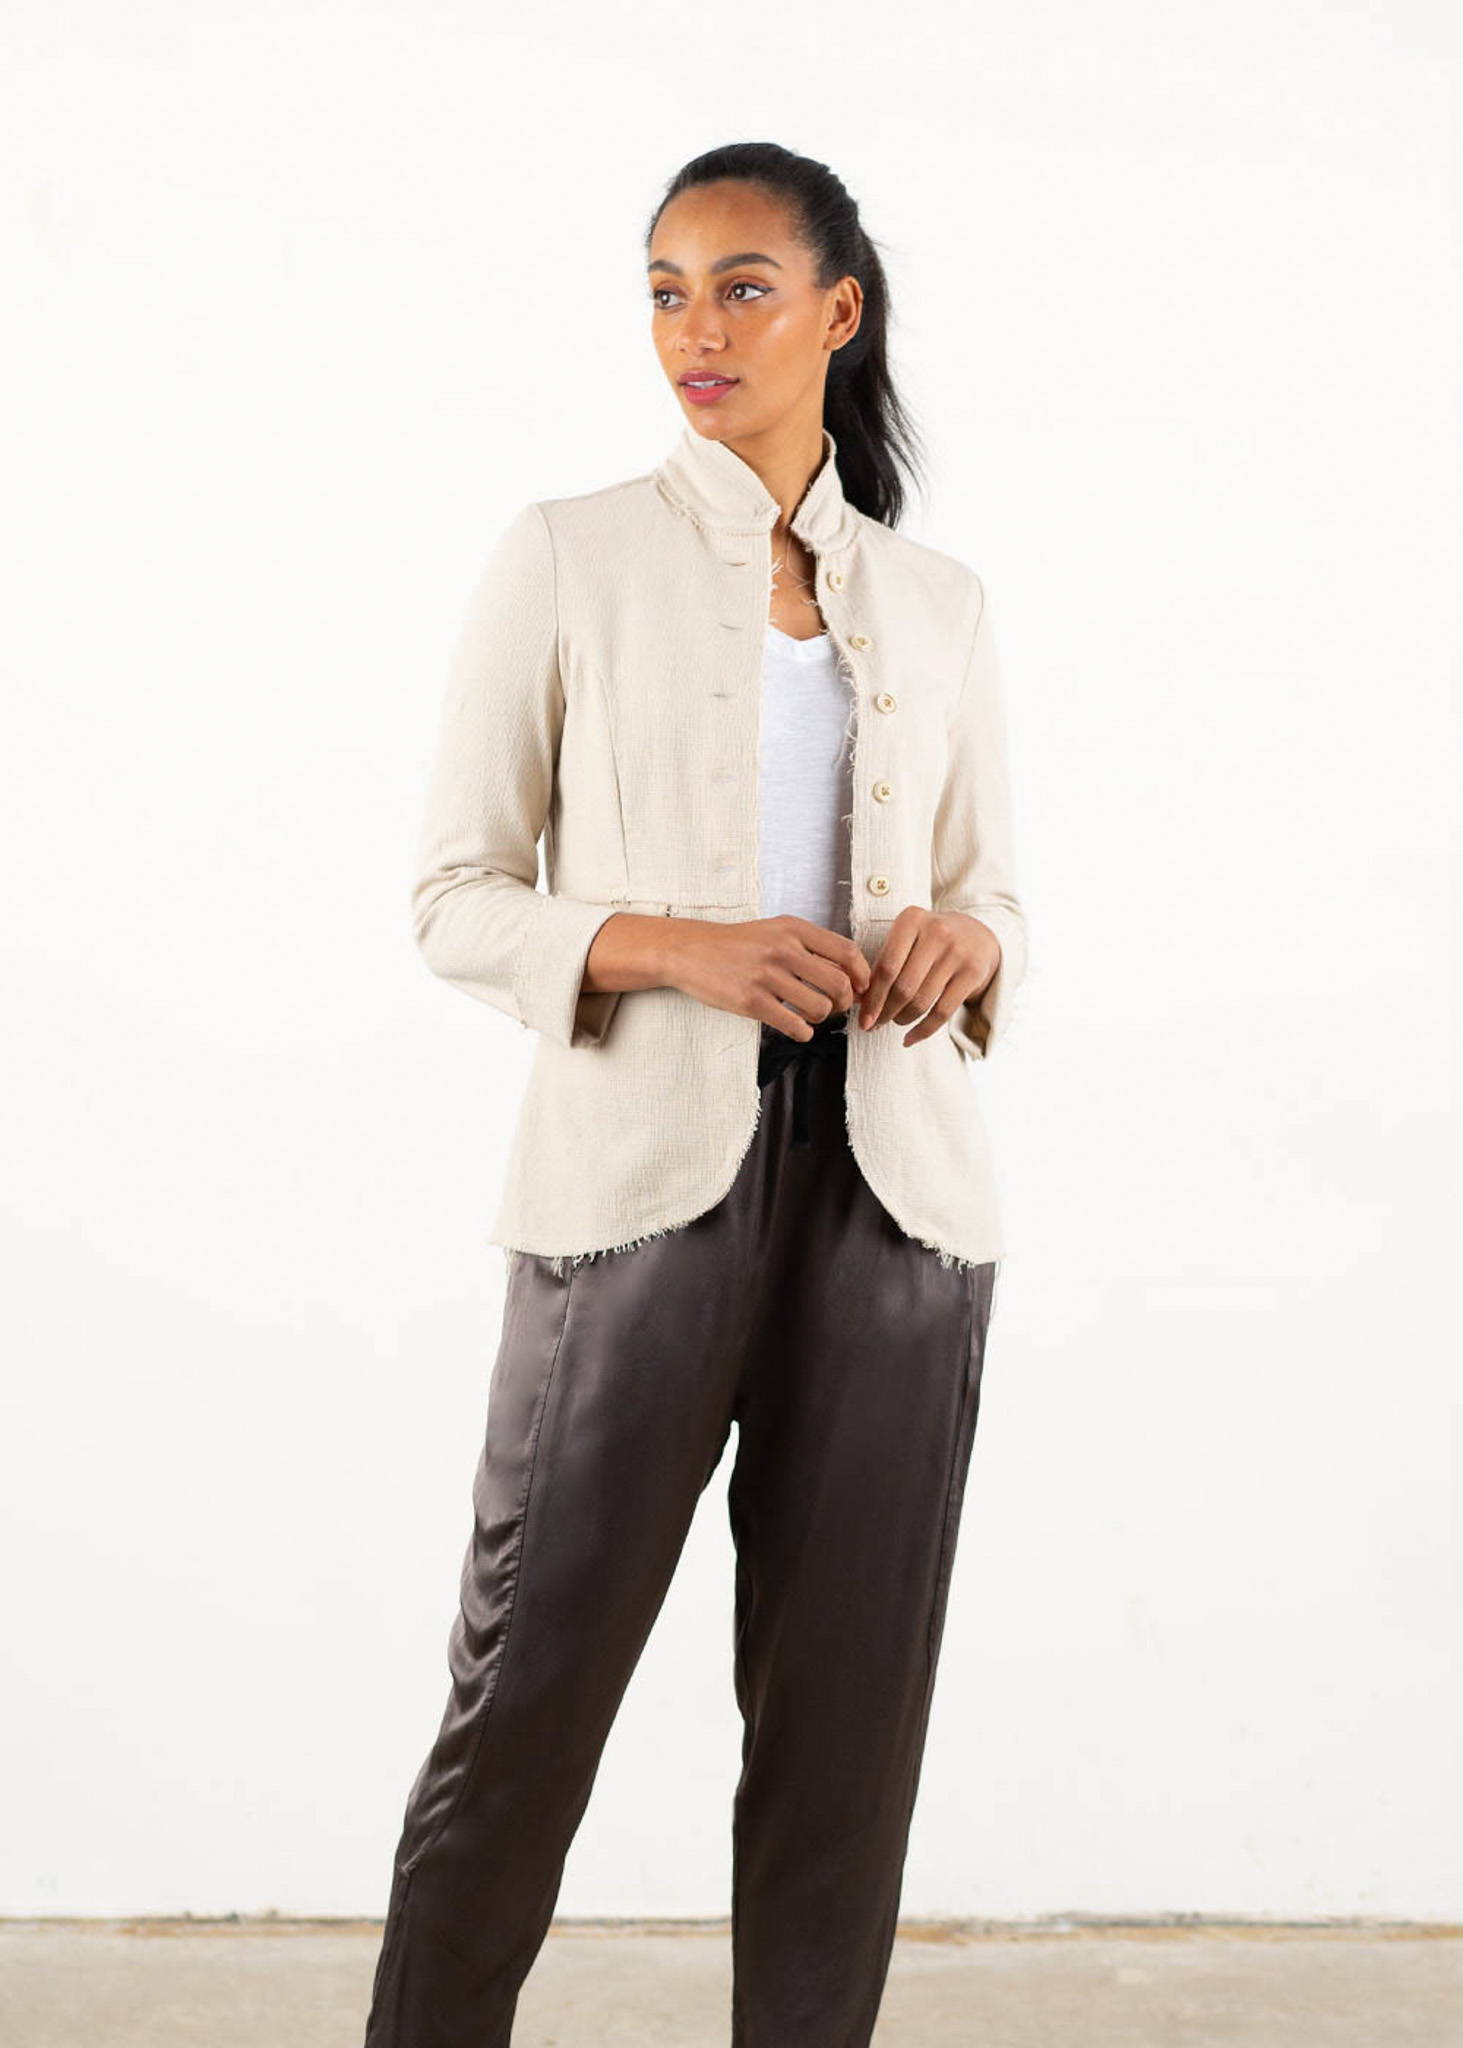 A model wearing a white cotton mix jacket with raw hem detailing over a white top and dark grey trousers